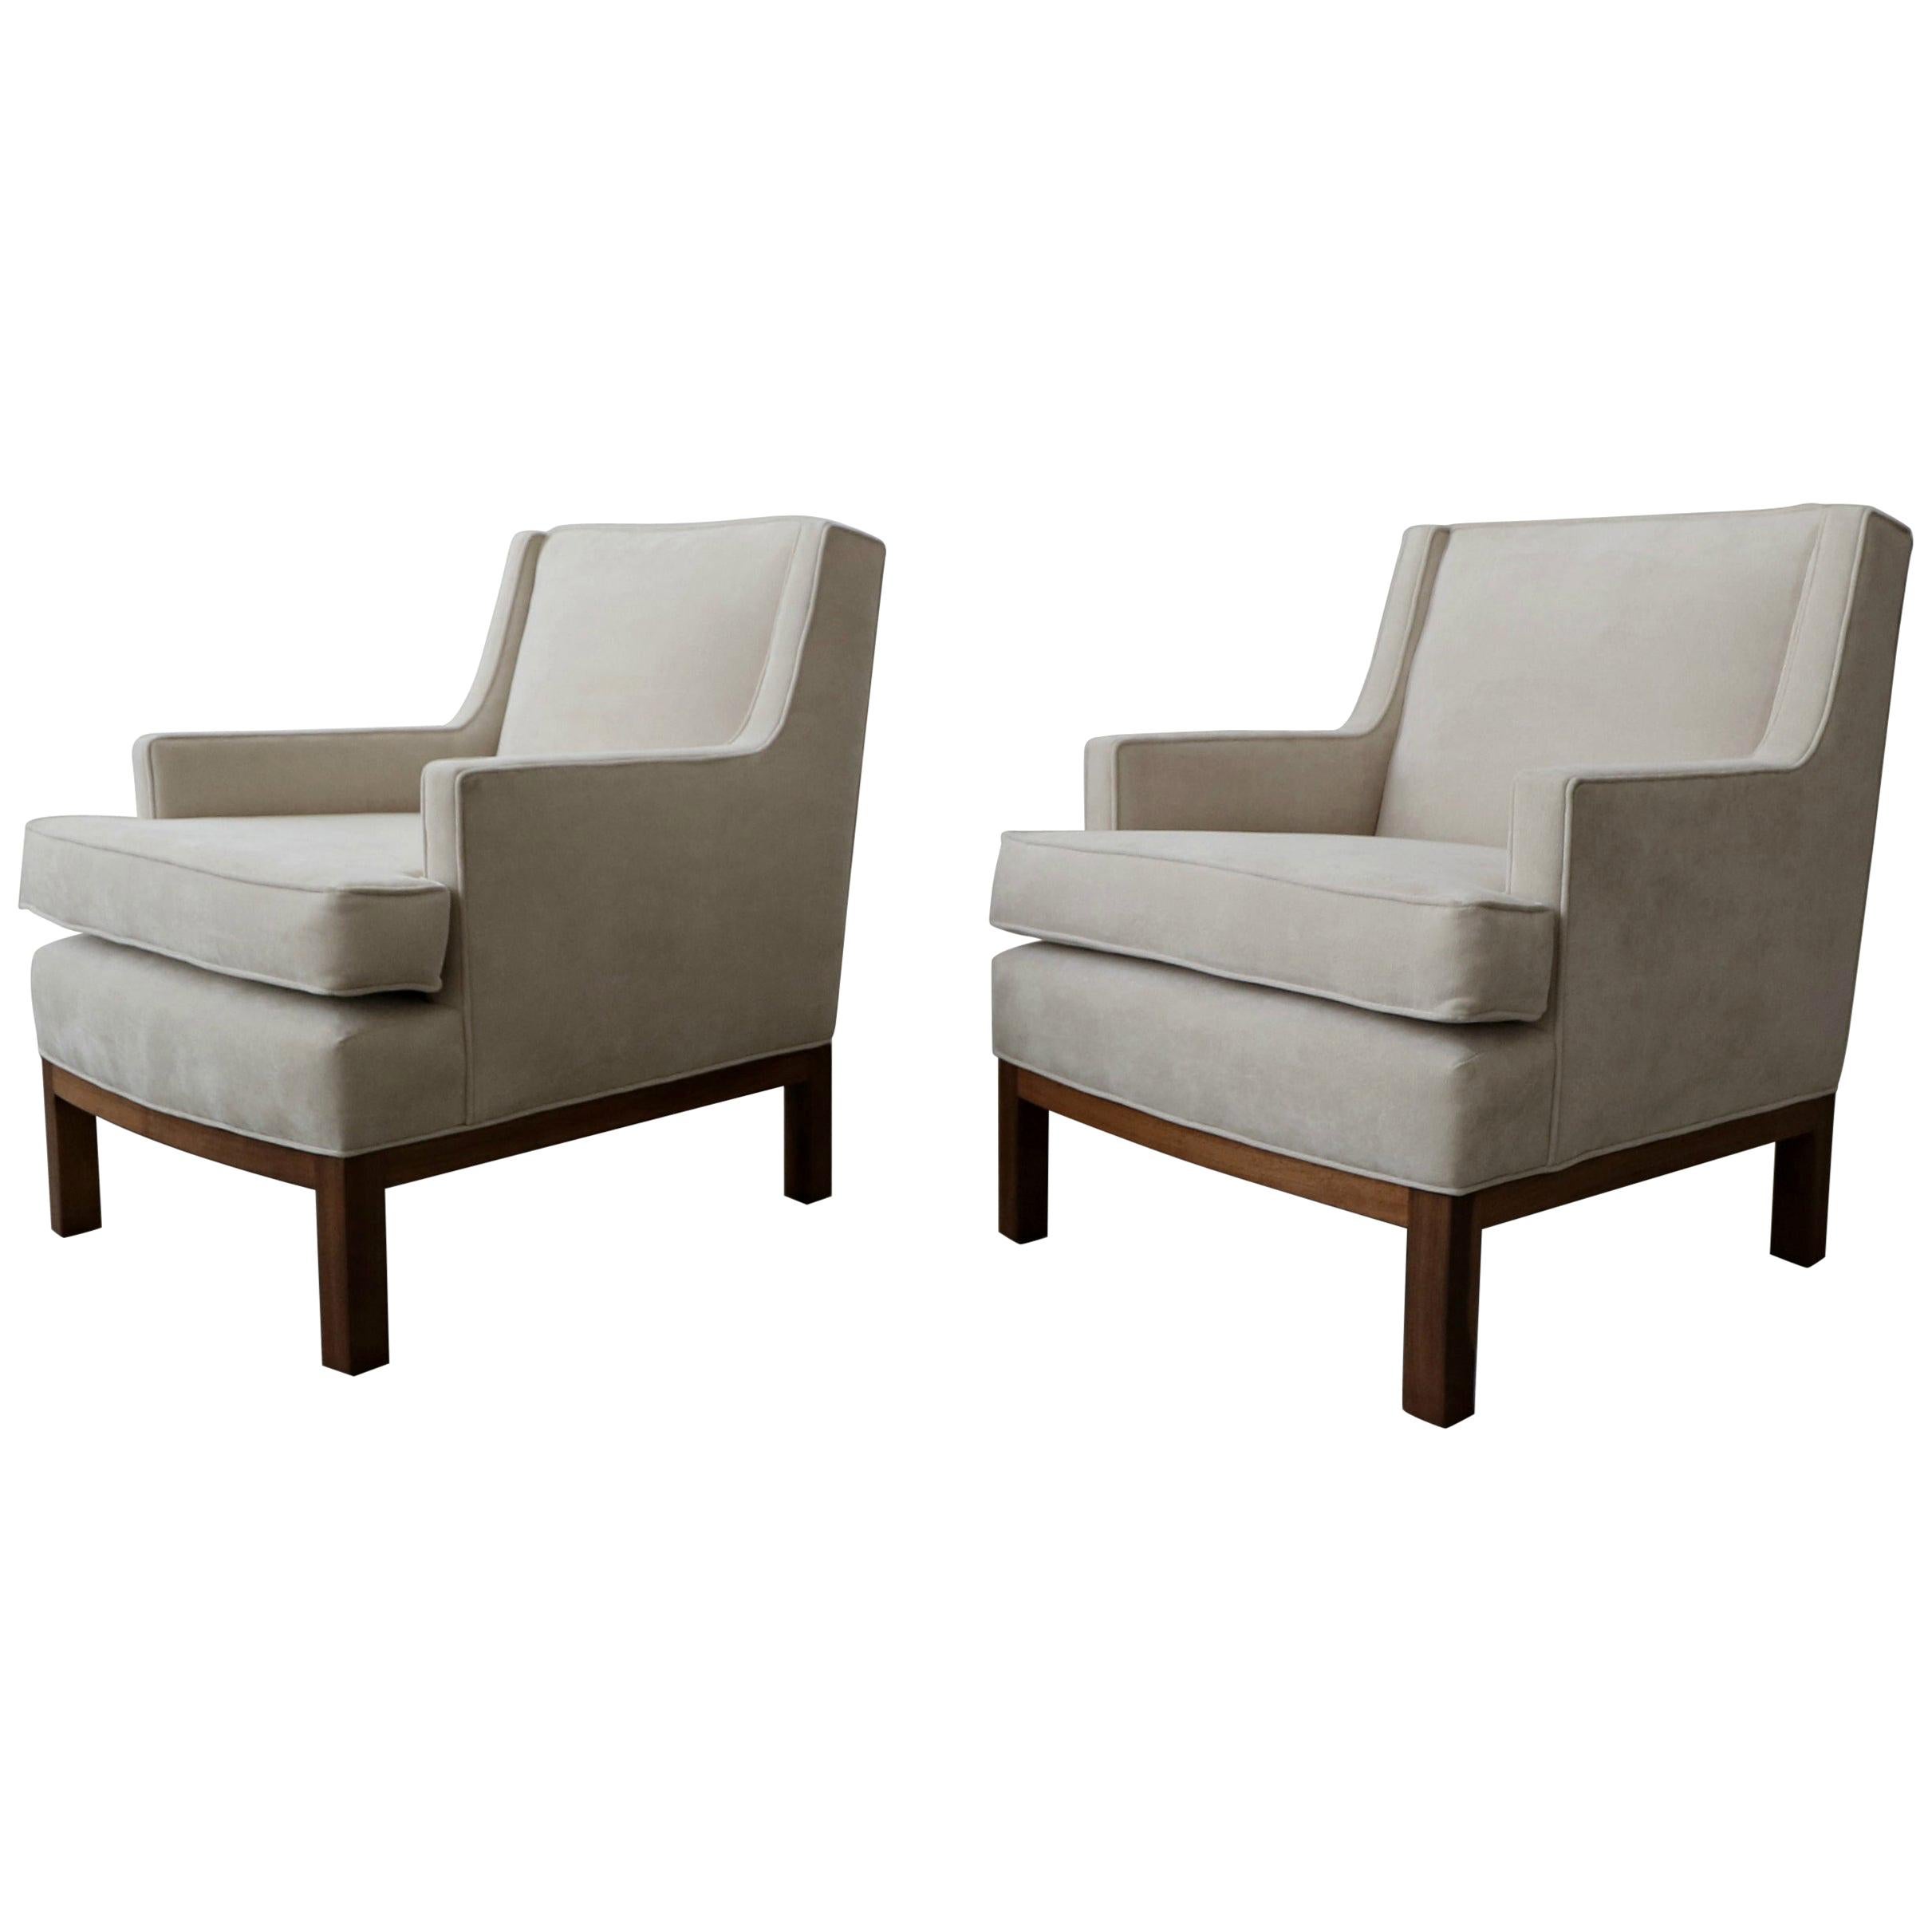 Pair of Midcentury Lounge Chairs